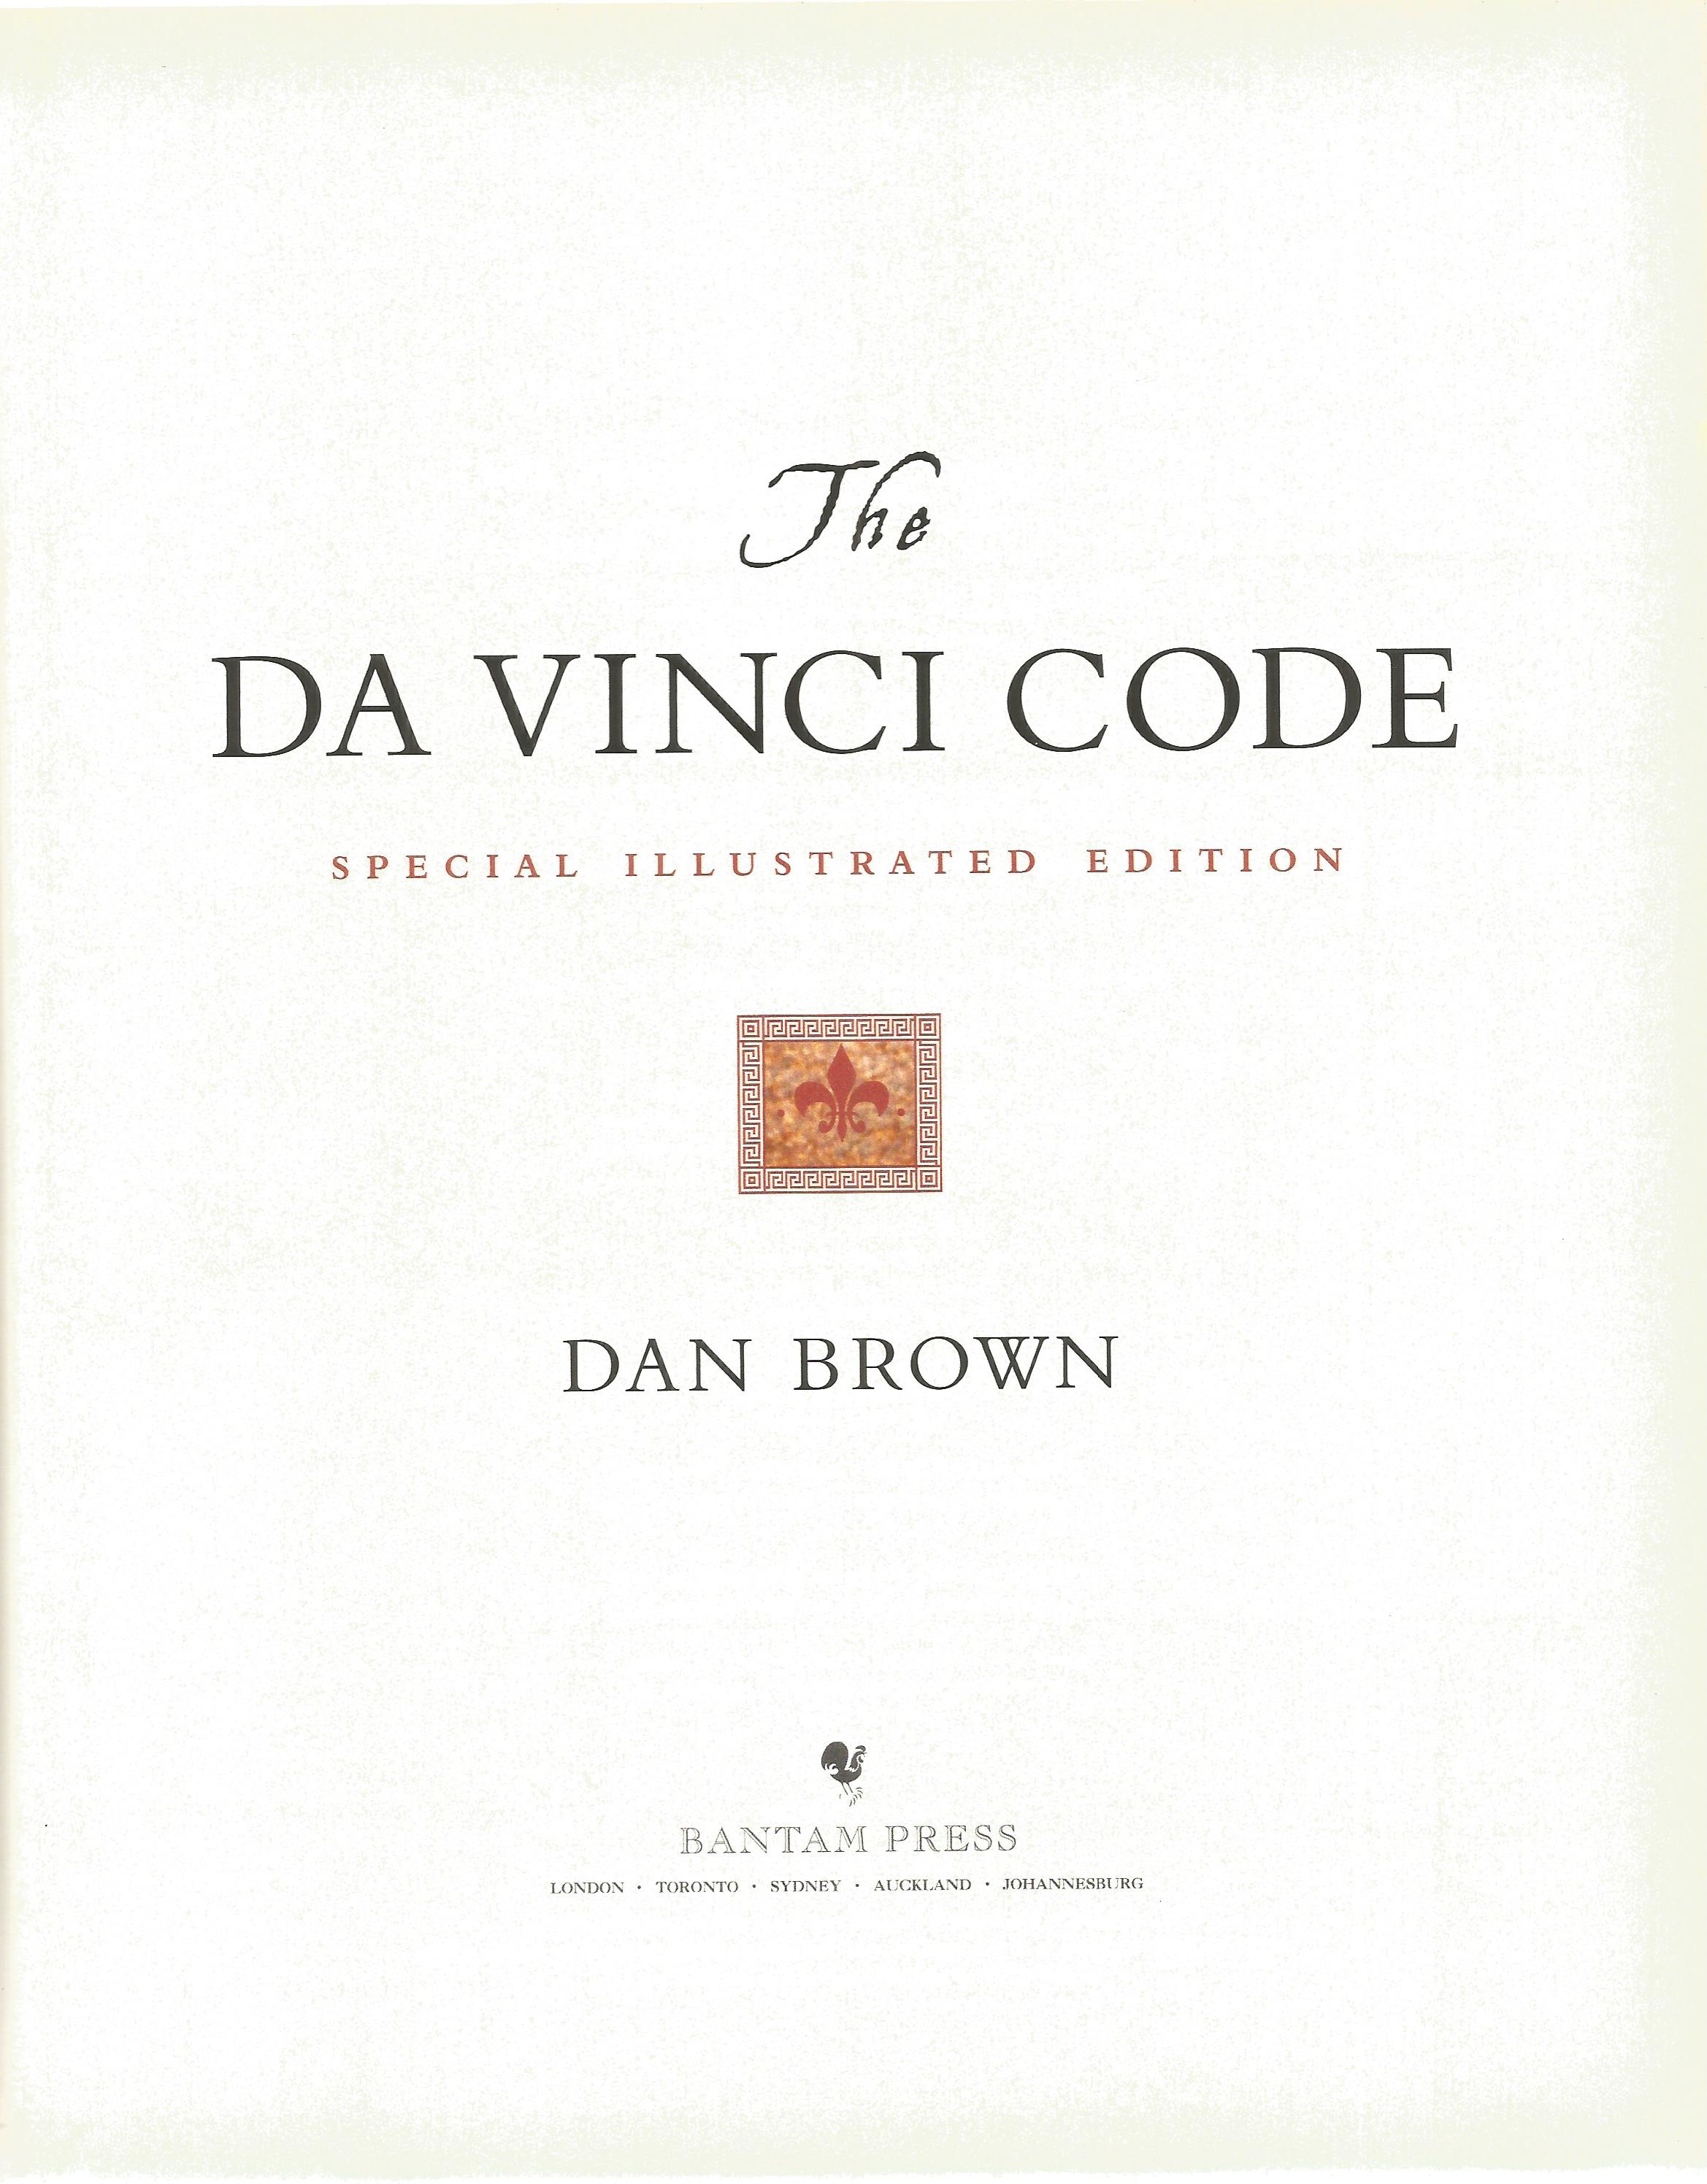 The Da Vinci Code by Dan Brown Hardback Book 2004 Special Illustrated Edition published by Bantam - Image 2 of 3